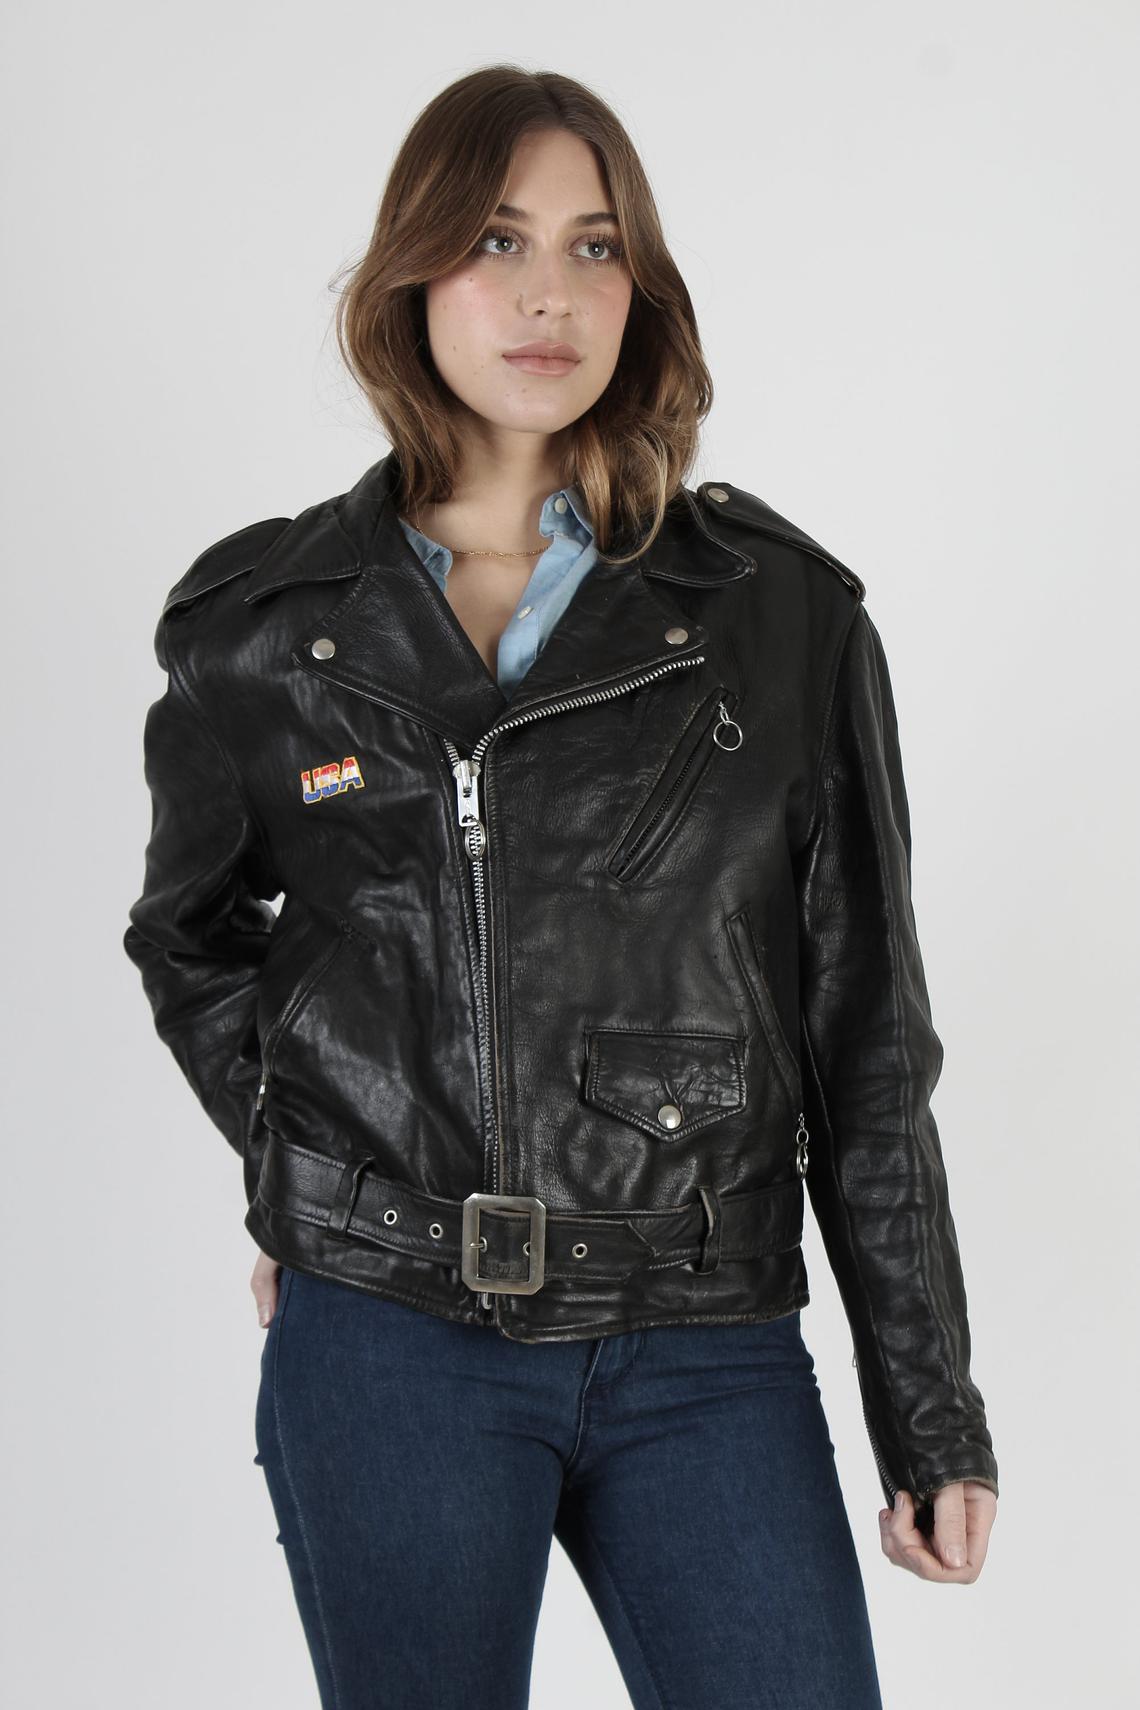 Women's leather jackets | Page 7 | The Fedora Lounge